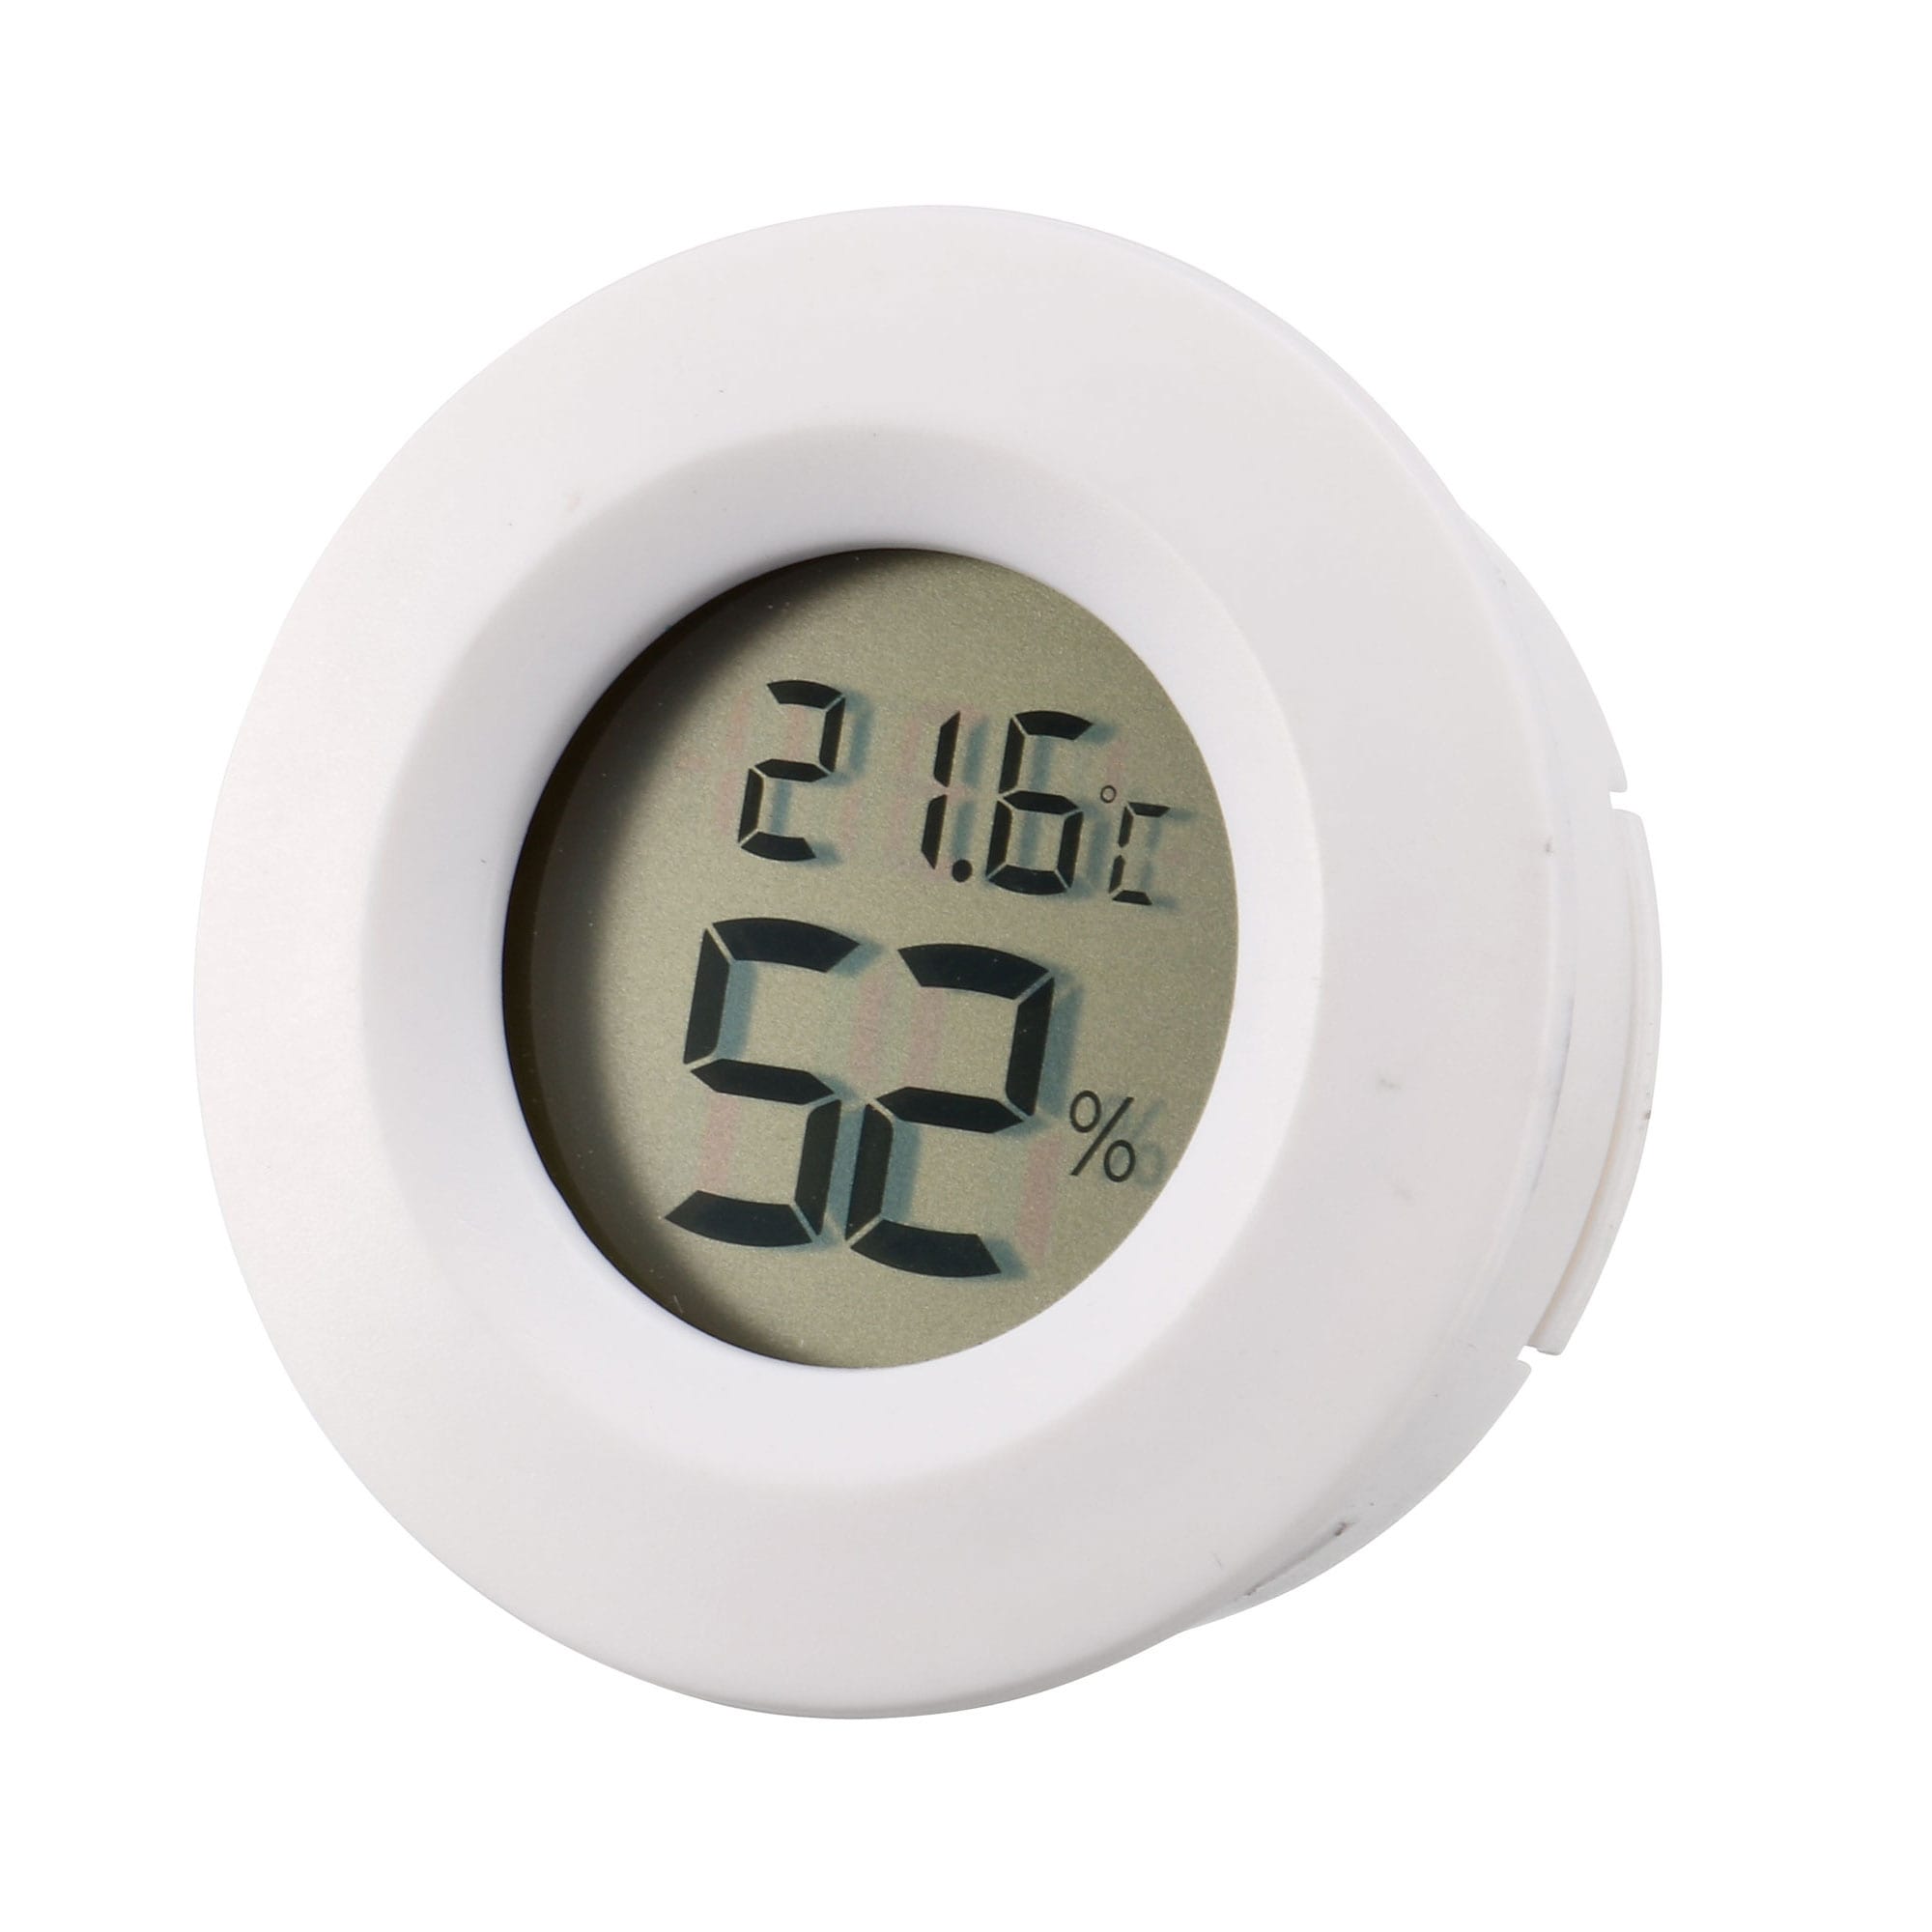 https://ak1.ostkcdn.com/images/products/is/images/direct/54caa4dc05b8475f7be86f0beaed79b24e5e4440/White-Round-Shape-Digital-Temp.-Humidity-Meters-Gauge-Thermometer-Hygrometer.jpg